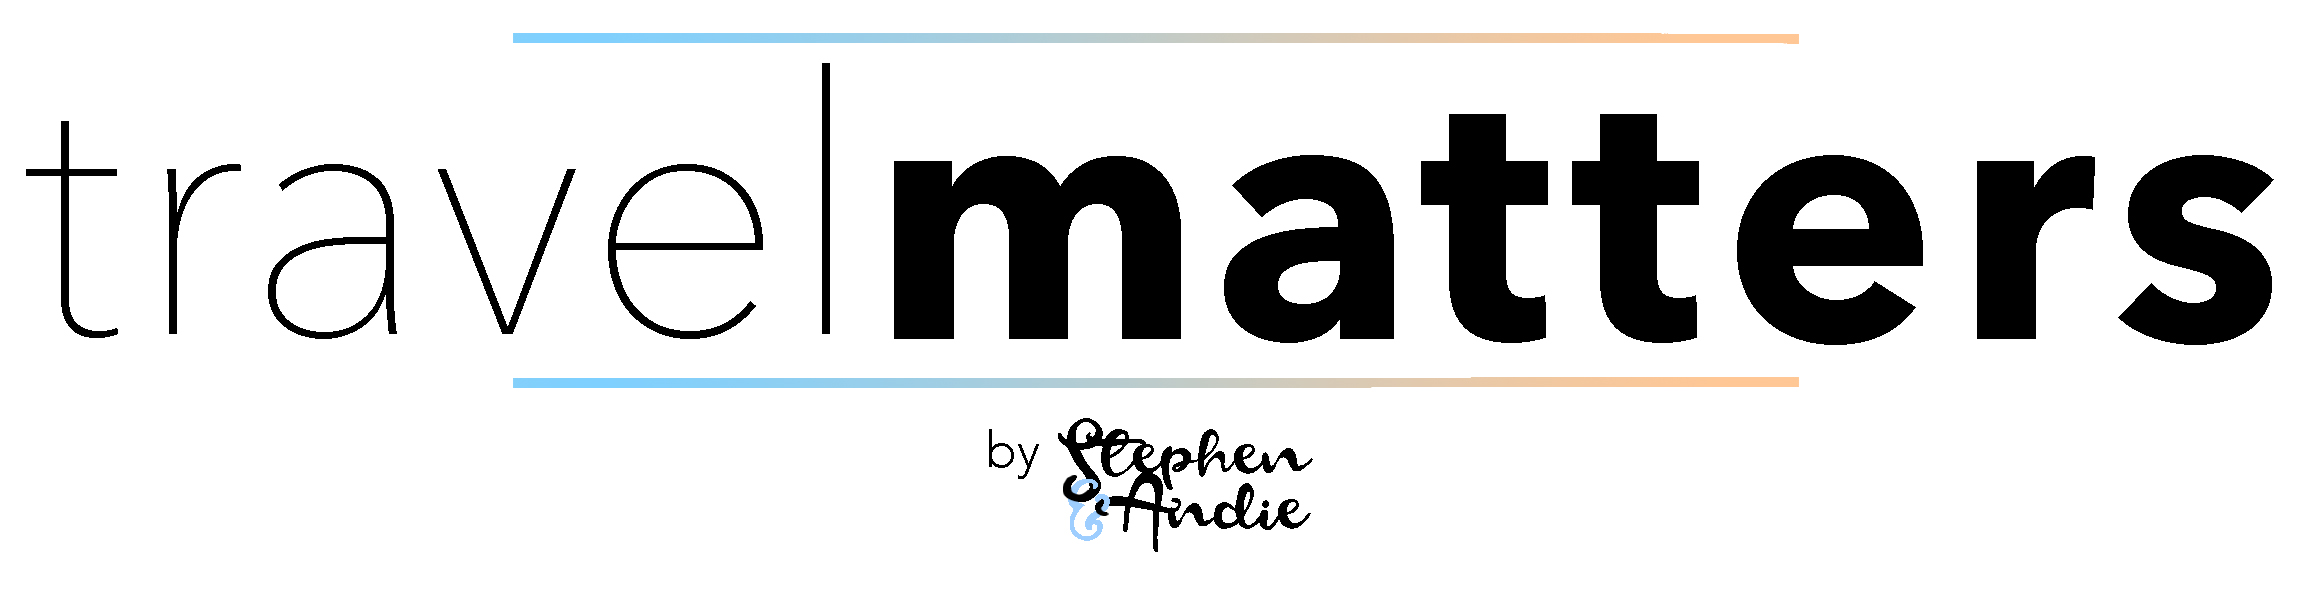 Travel Matters | by Stephen & Andie